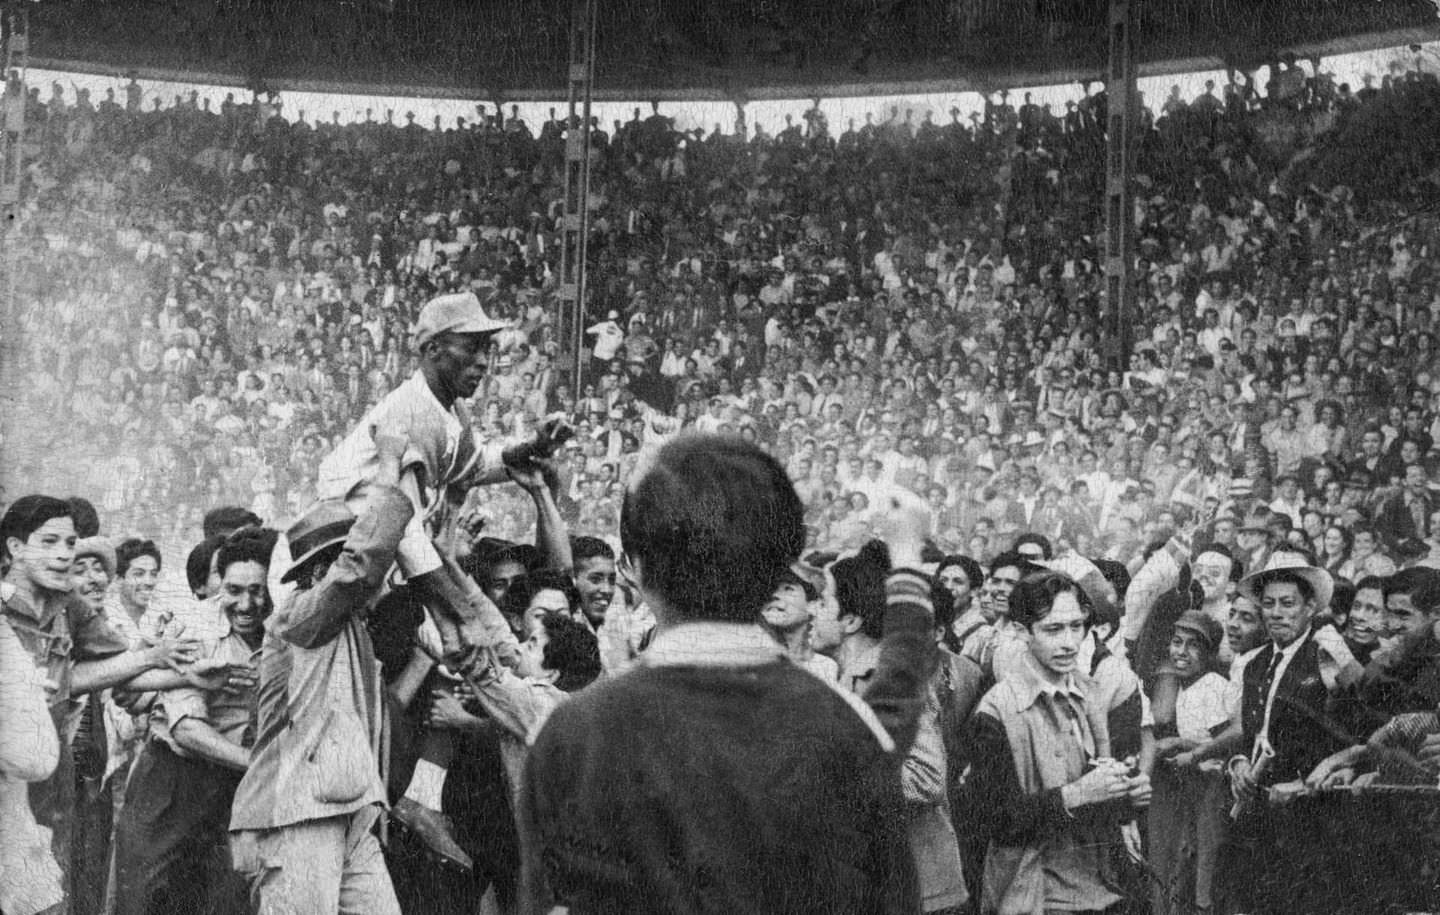 Carlos Colas, on the shoulders of the fans, celebrates an important but unknown Latin American baseball tournament around 1940